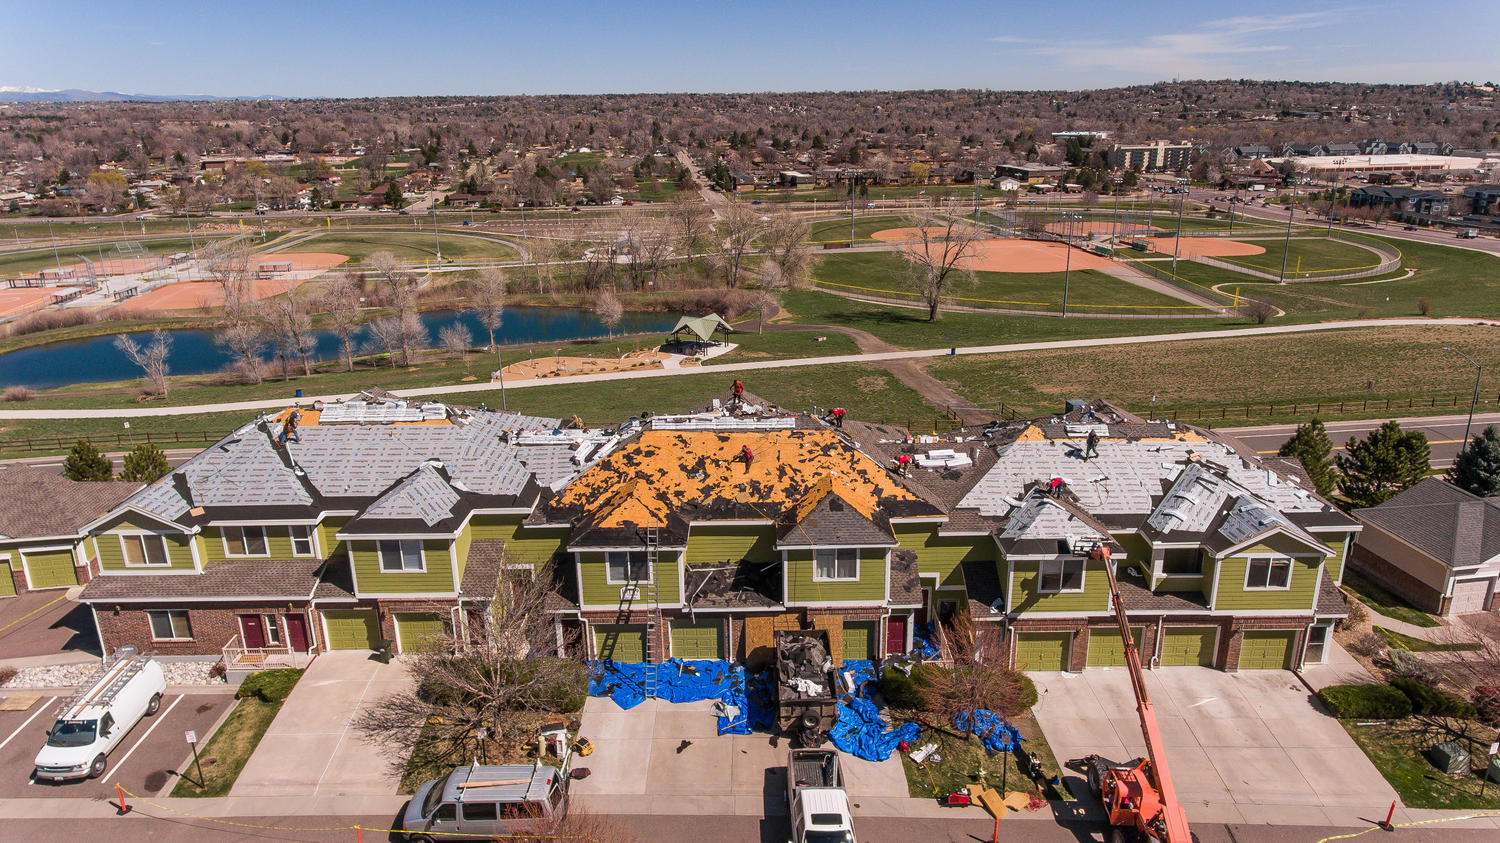 Overhead shot of Skyline Estates Condos with roofing construction